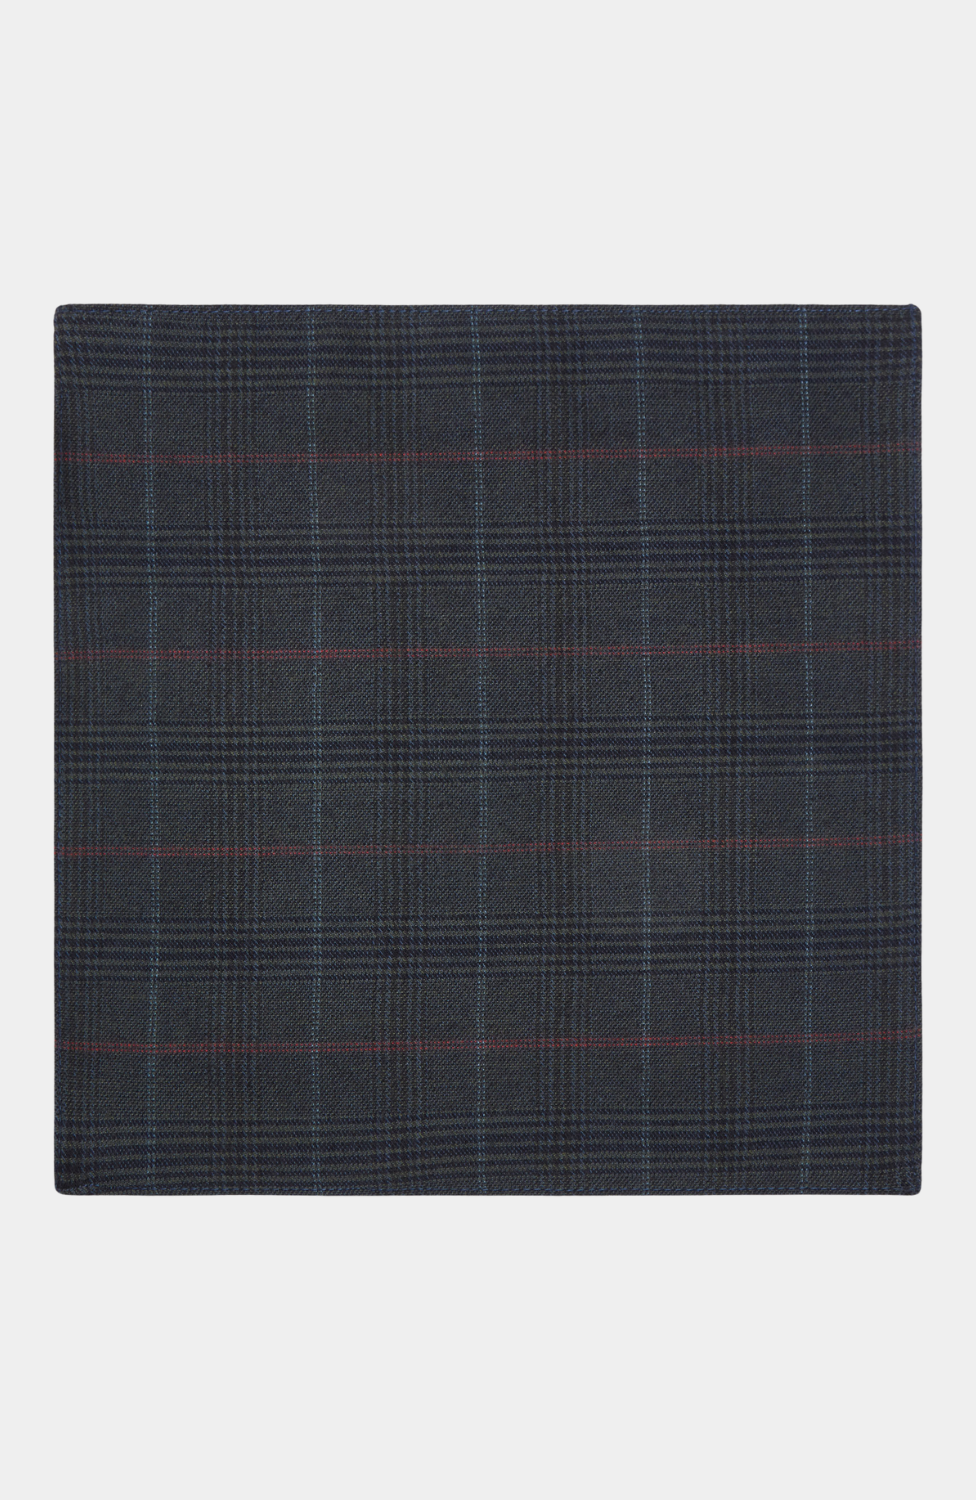 ANGLESEY POCKET SQUARE - HIRE